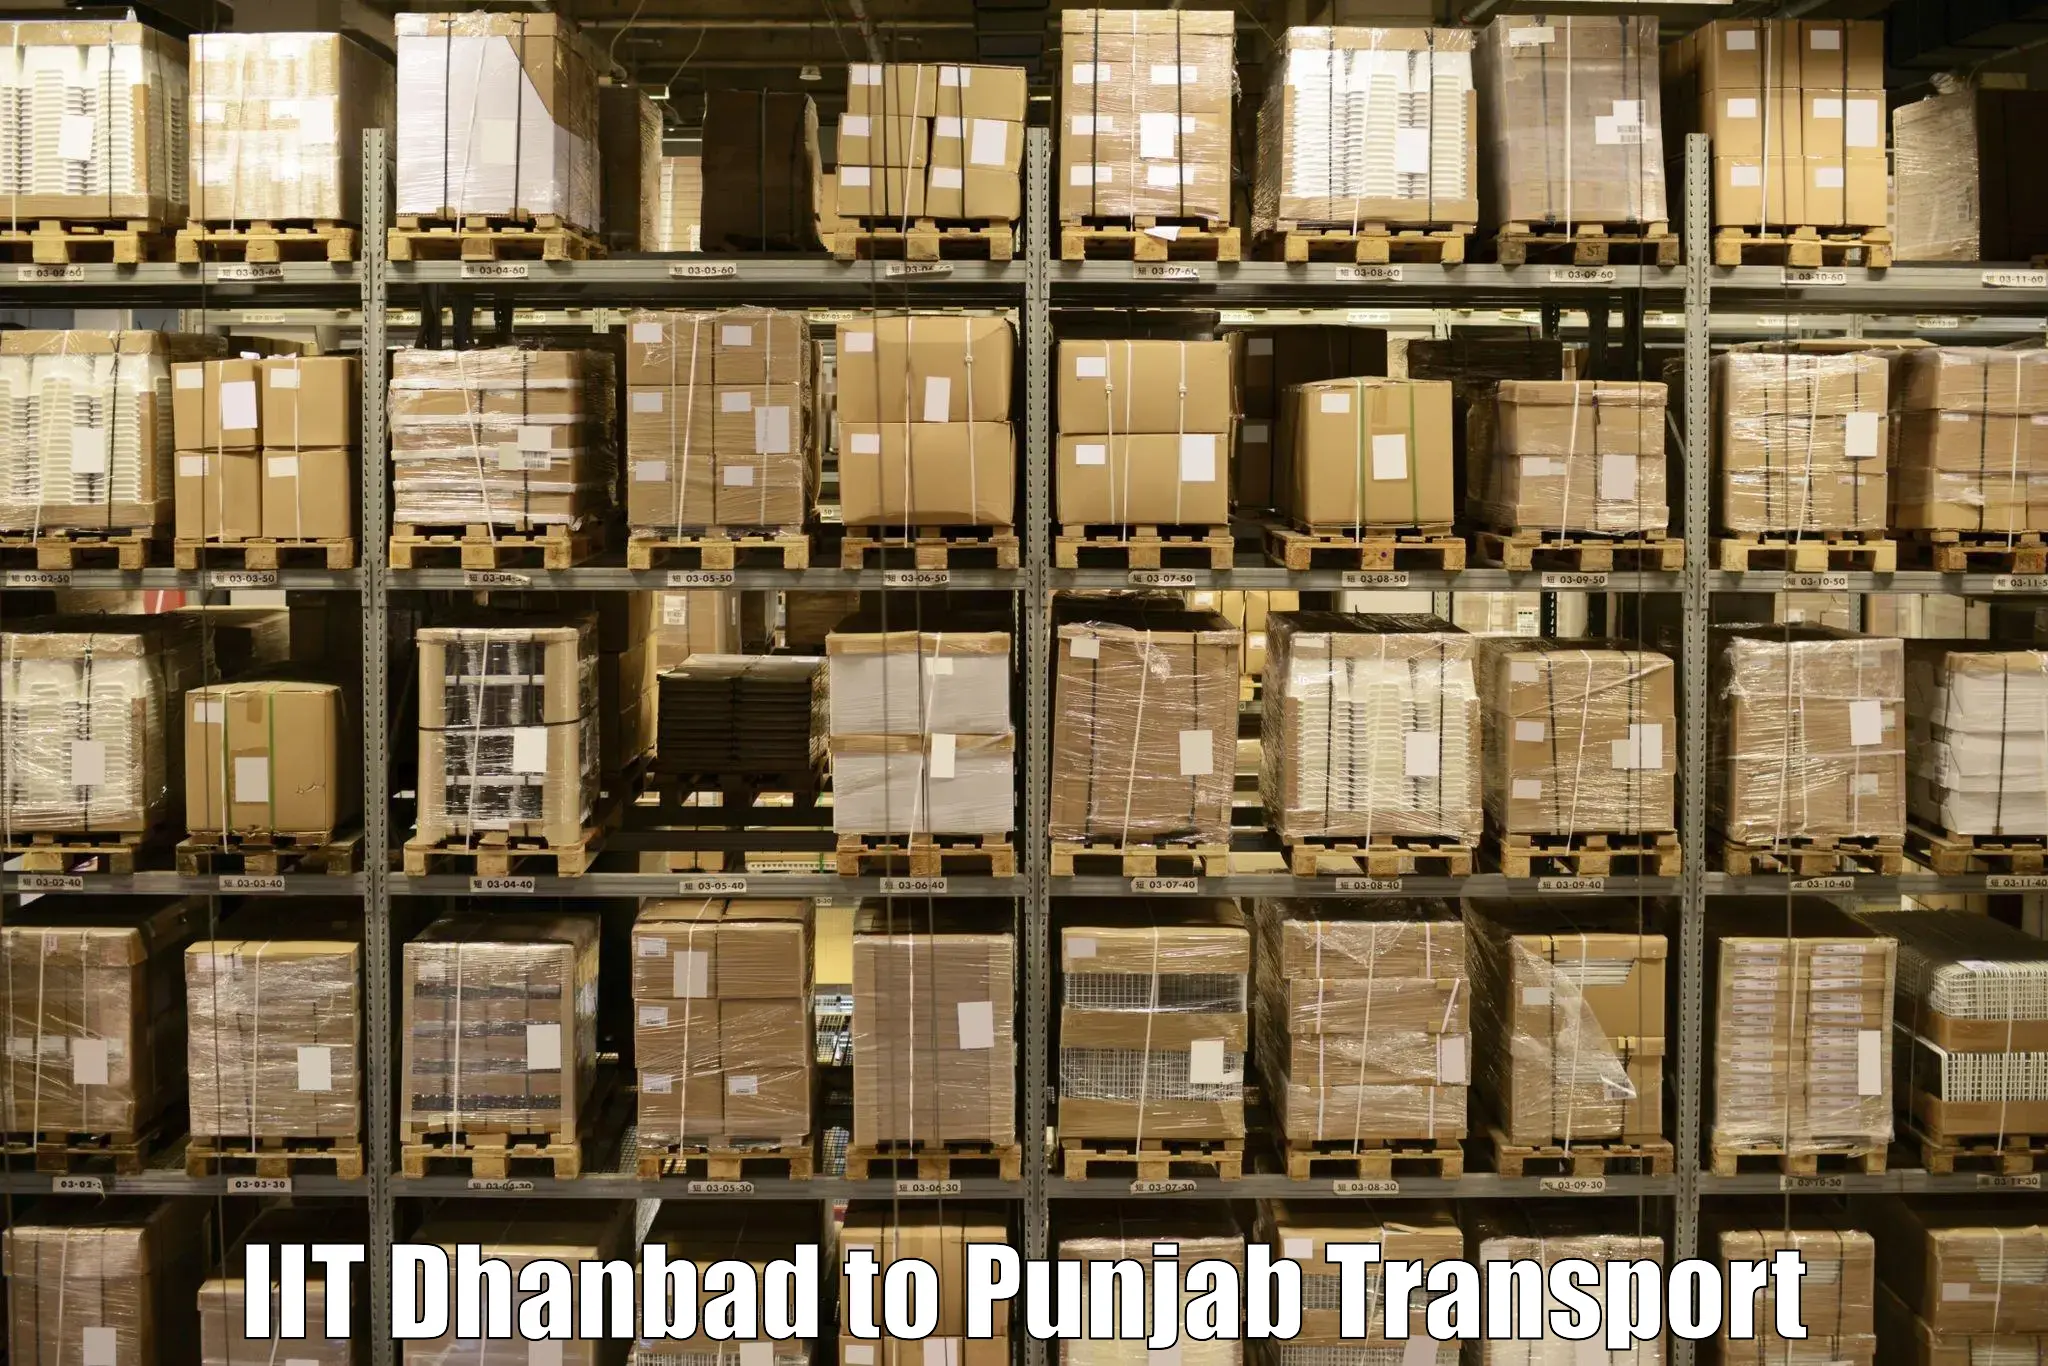 Express transport services in IIT Dhanbad to Punjab